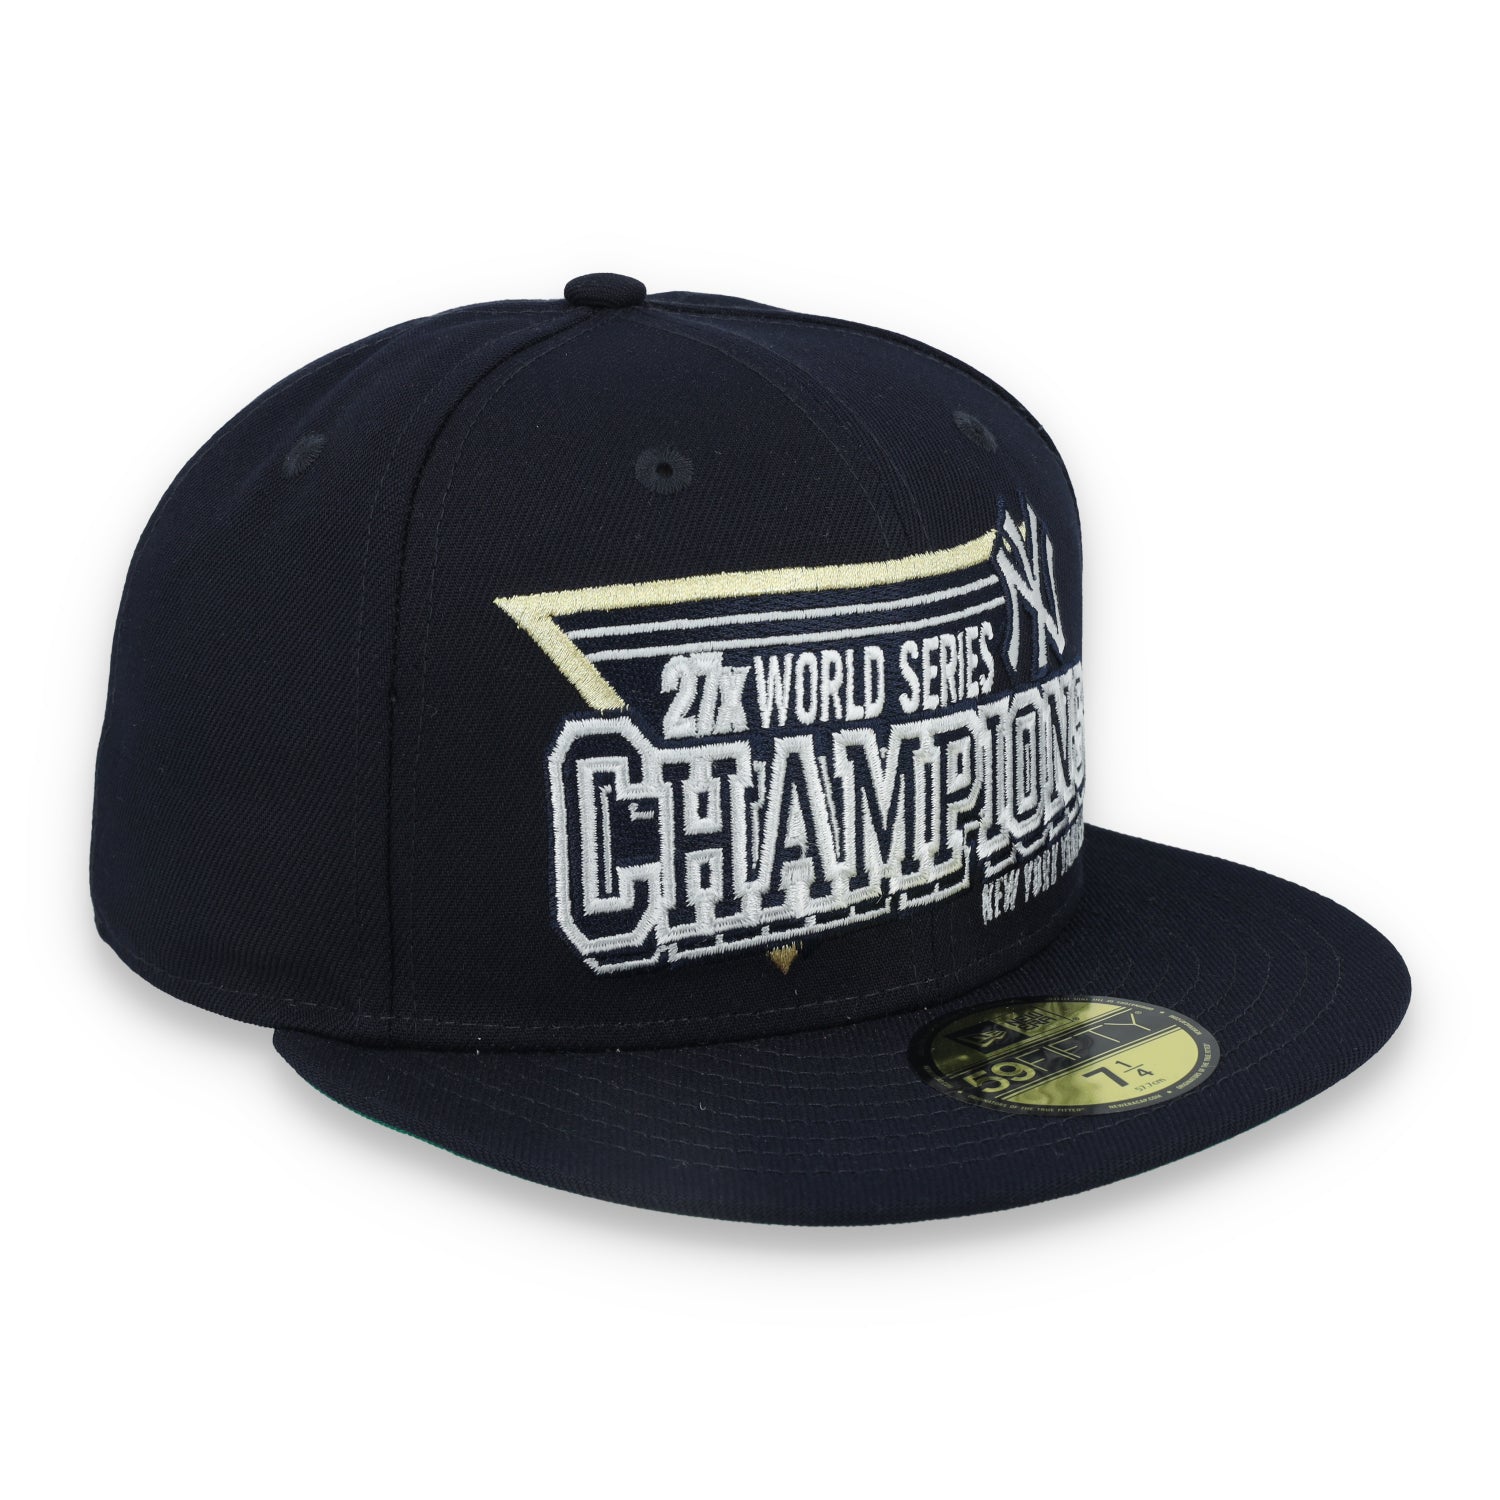 New Era New York Yankees 27x Champion Throwback 59FIFTY Fitted Hat